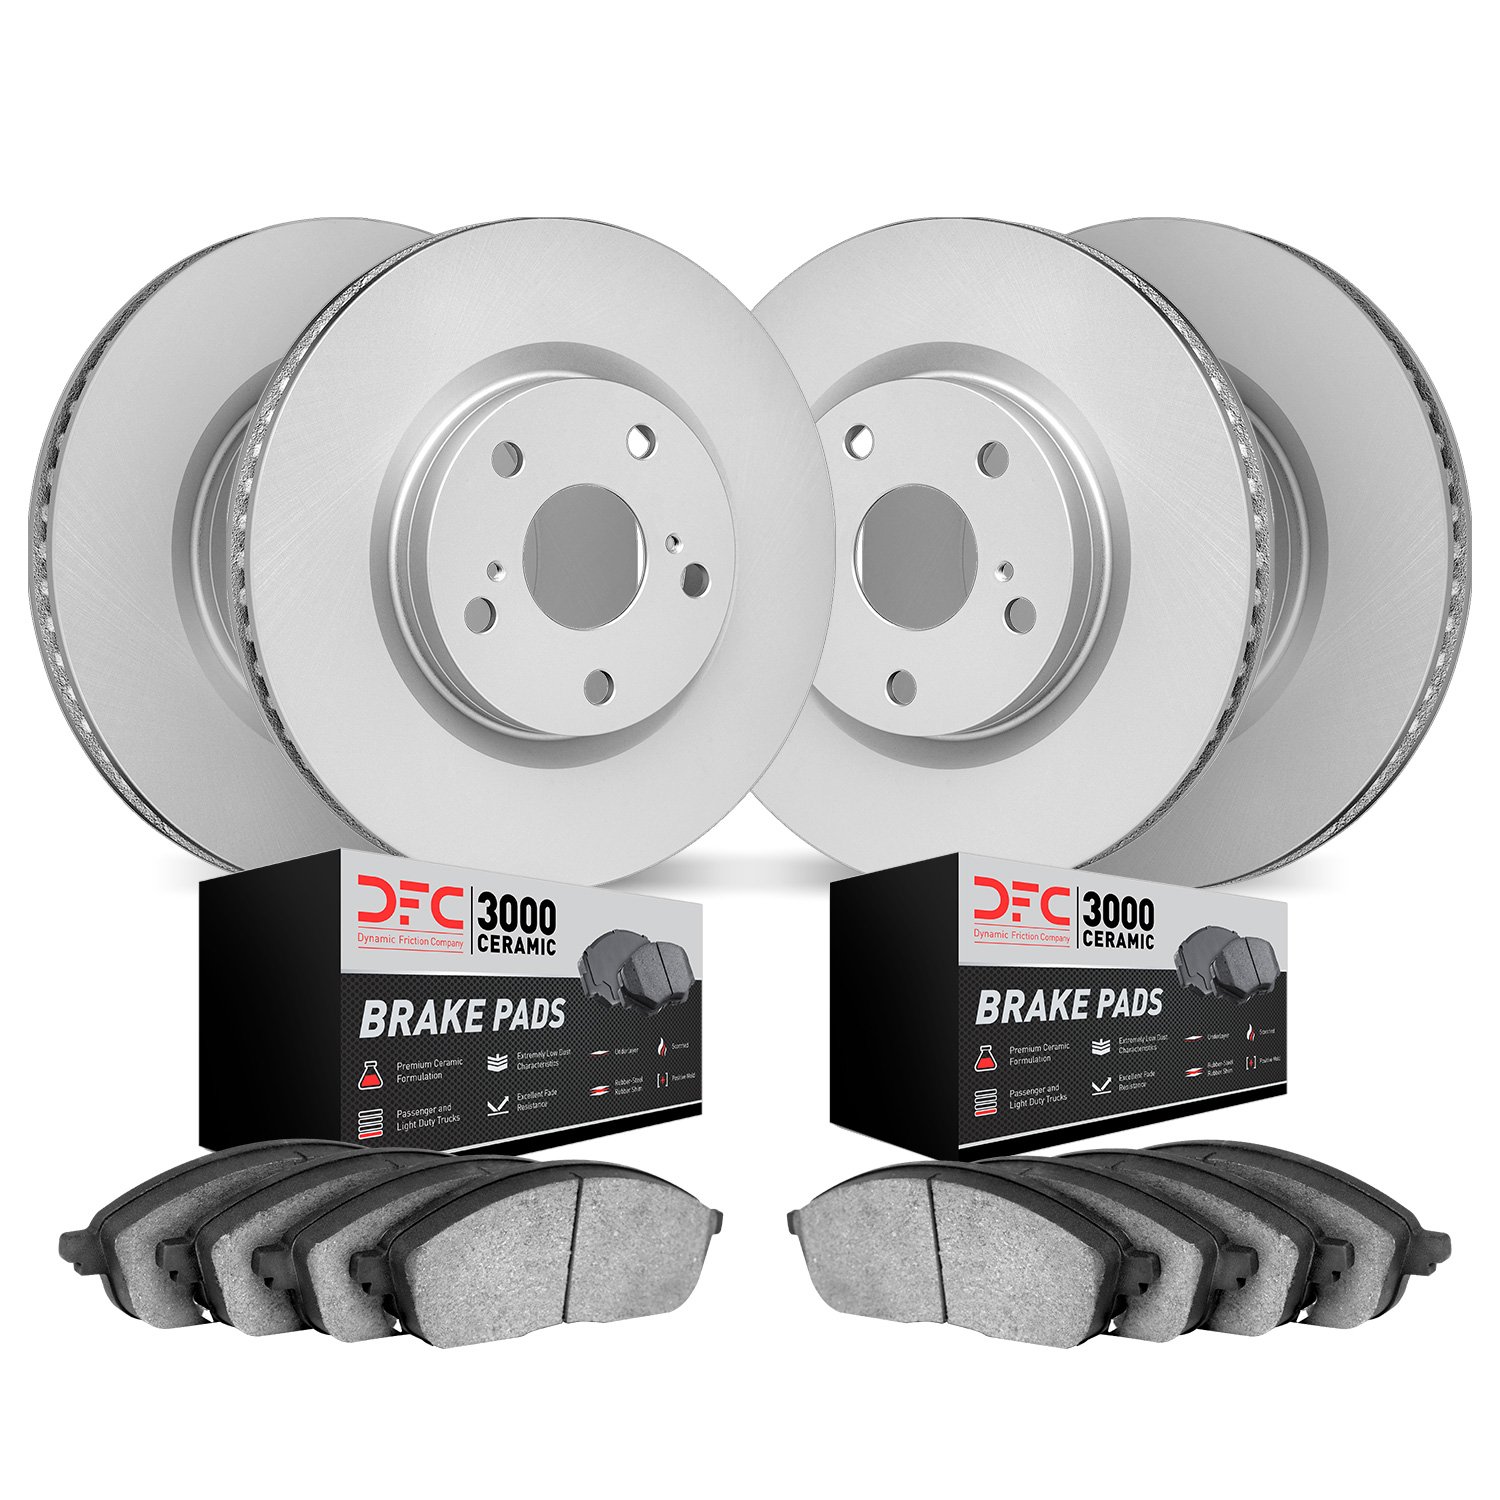 4304-75002 Geospec Brake Rotors with 3000-Series Ceramic Brake Pads Kit, 1993-1994 Lexus/Toyota/Scion, Position: Front and Rear